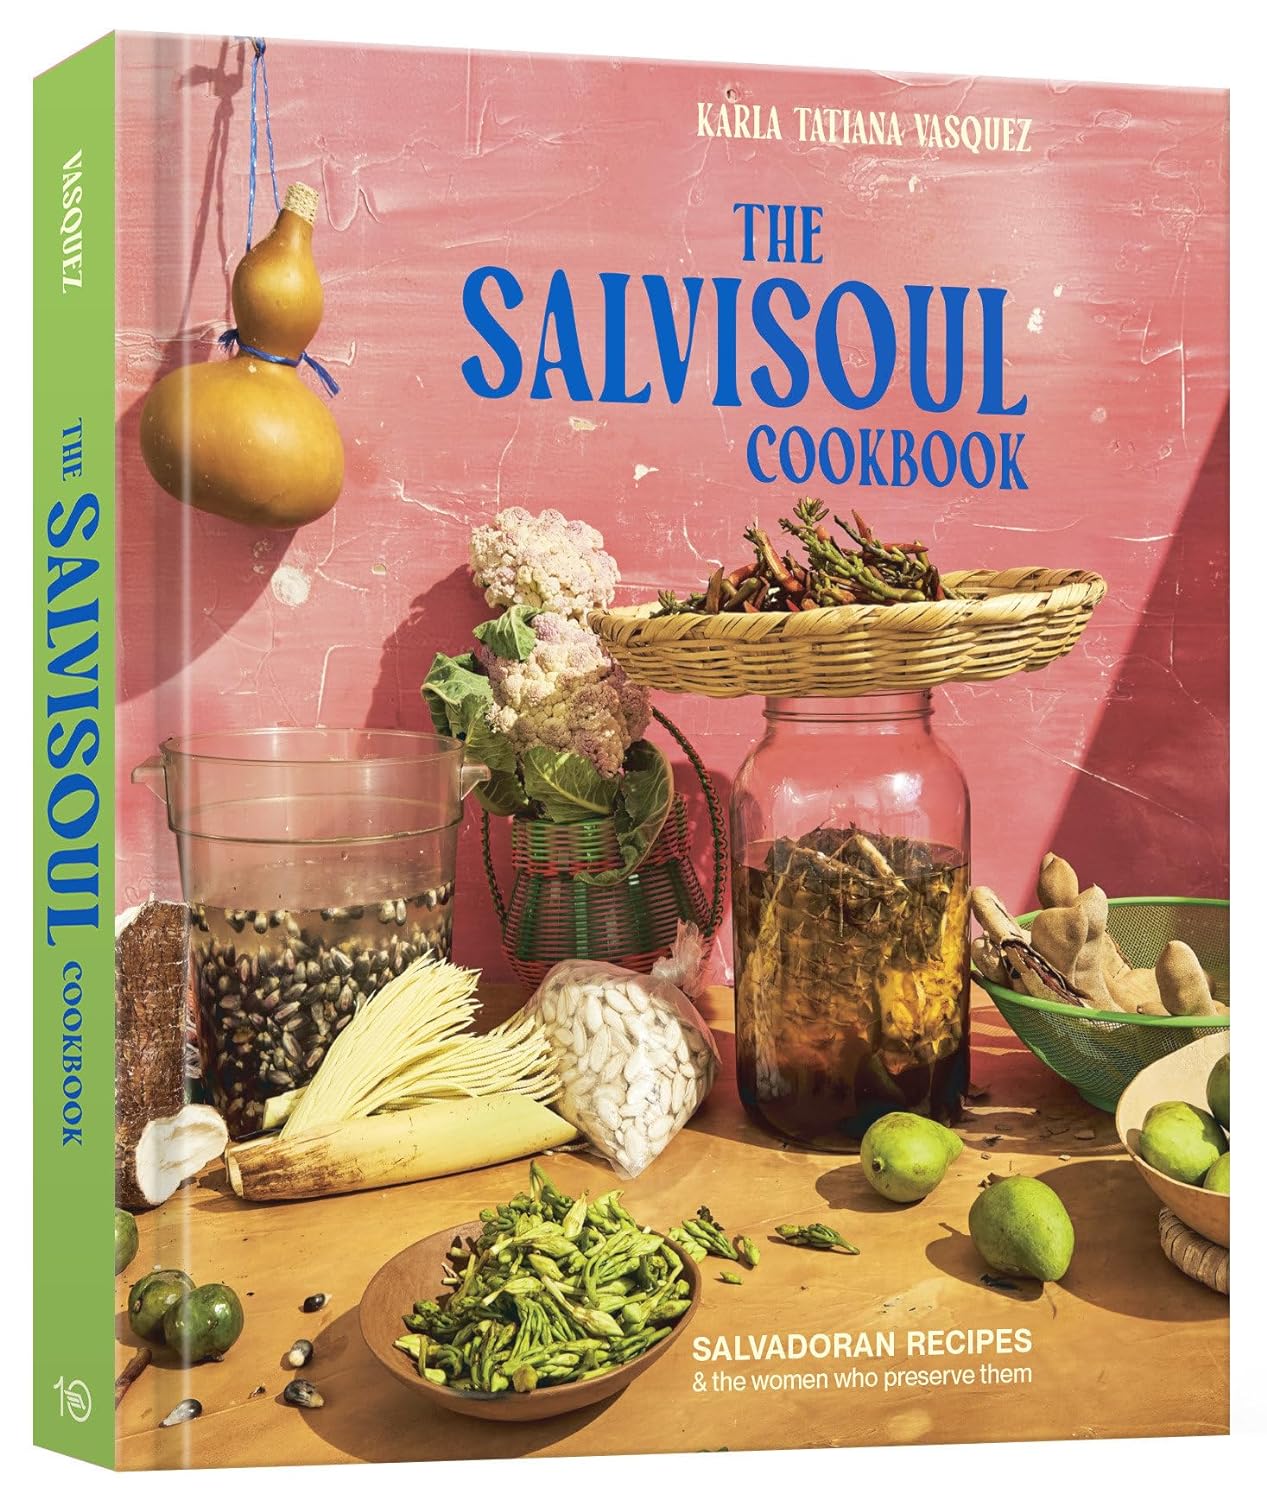 The SalviSoul Cookbook: Salvadoran Recipes and the Women Who Preserve Them Hardcover